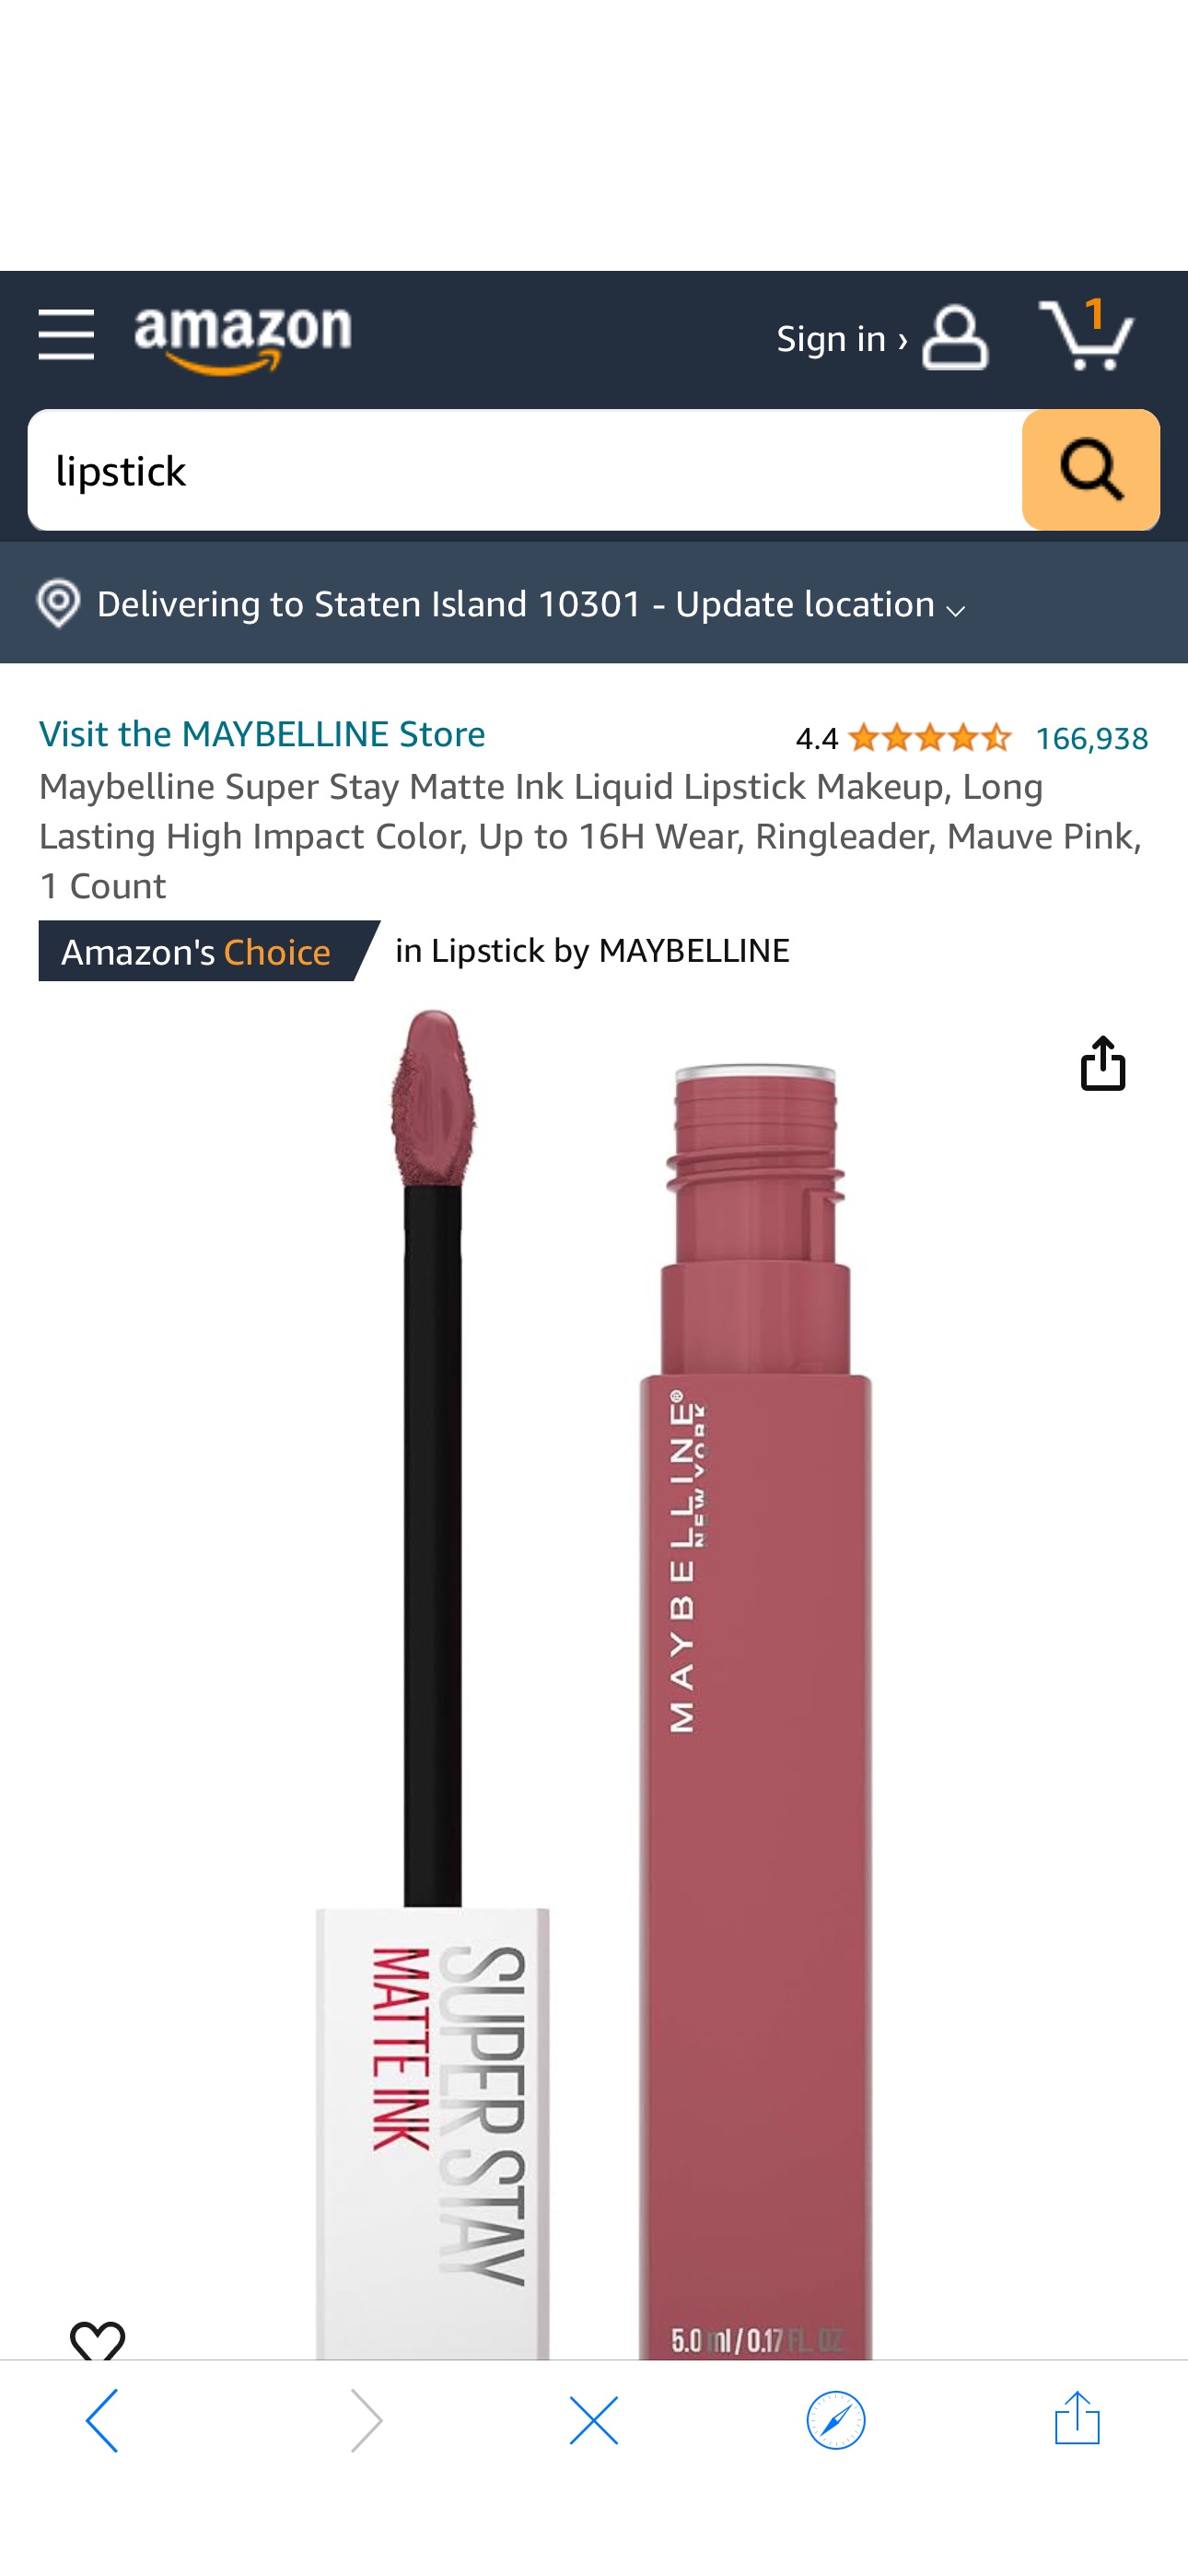 Amazon.com: Maybelline Super Stay Matte Ink Liquid Lipstick Makeup, Long Lasting High Impact Color, Up to 16H Wear, Ringleader, Mauve Pink, 1 Count : Beauty & Personal Care